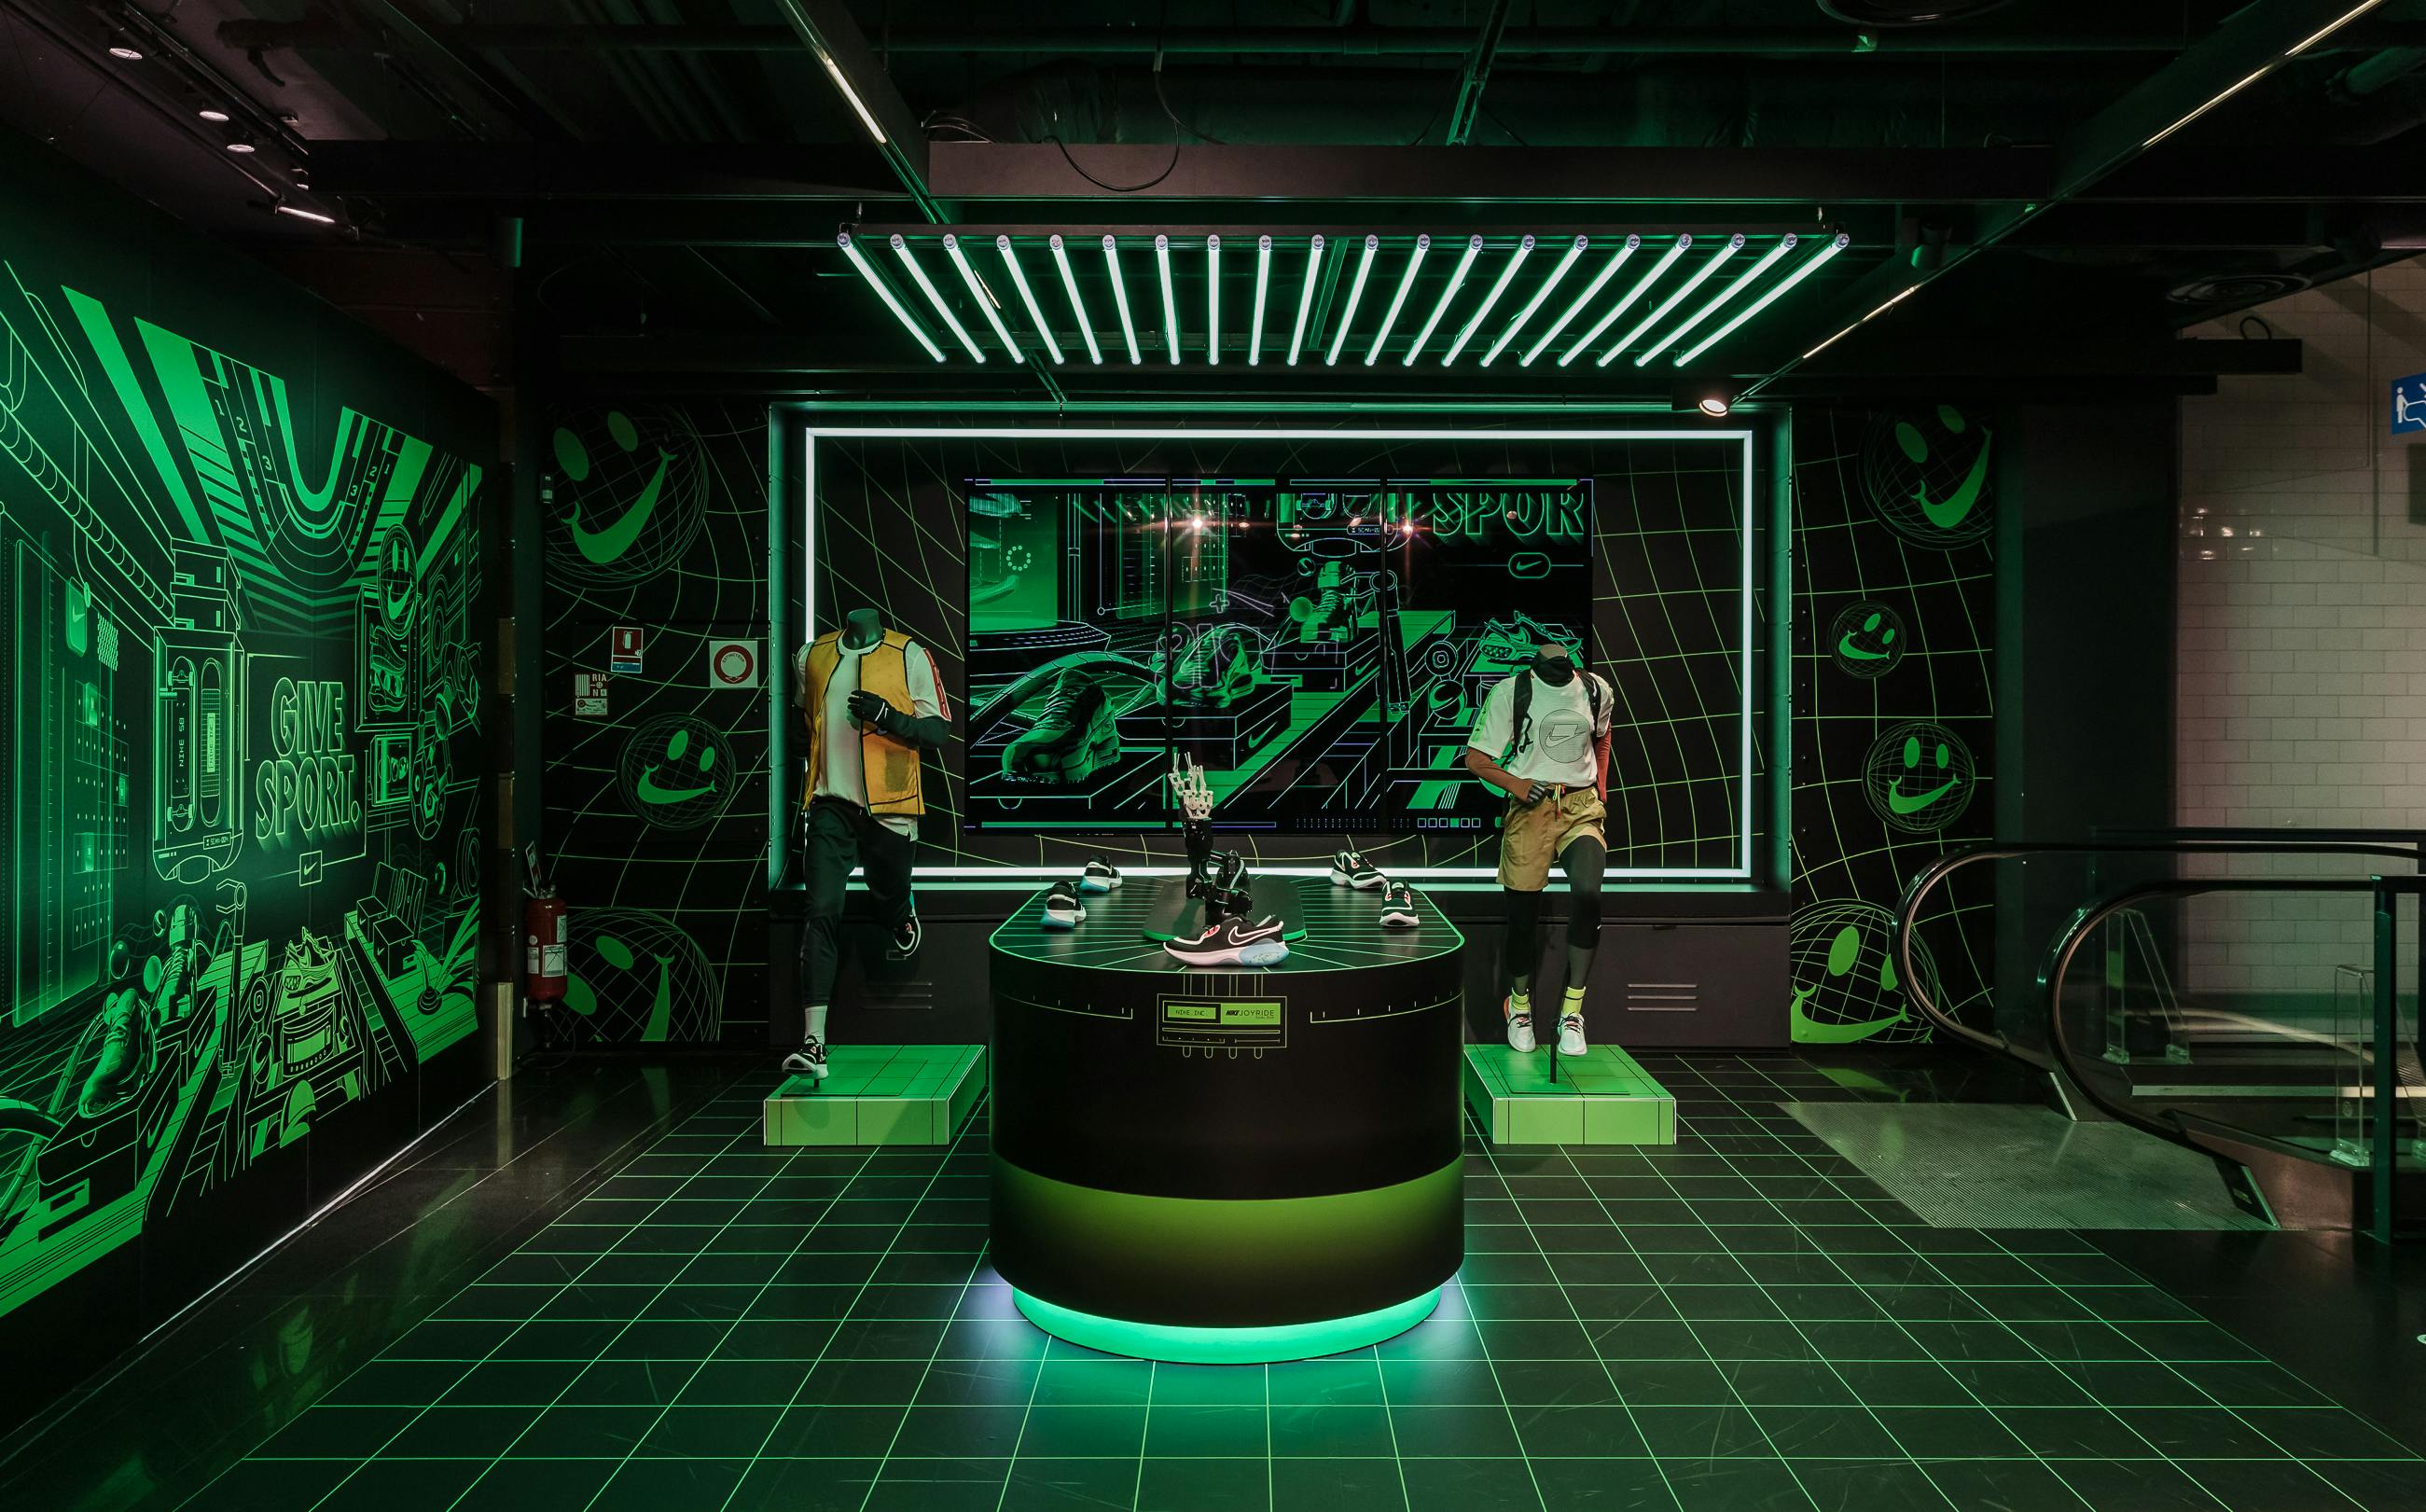 Nike retail design GIVE SPORT